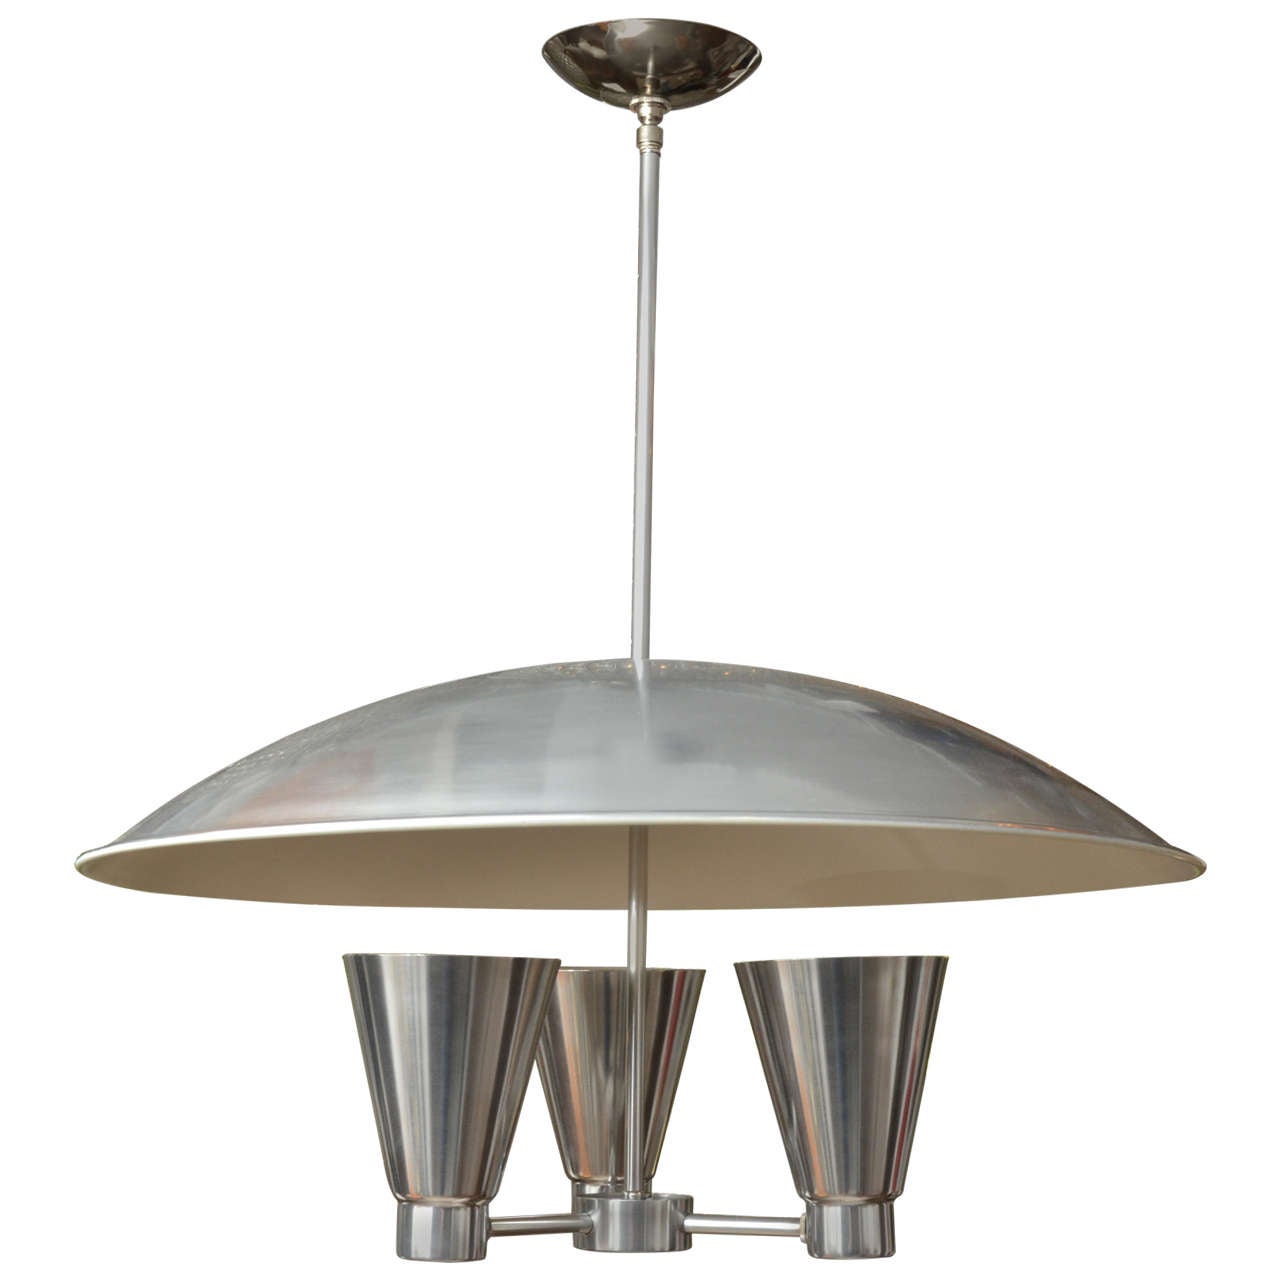 Spun Aluminium Dome Ceiling Fixture with Conical Uplights by Edward Wormley For Sale